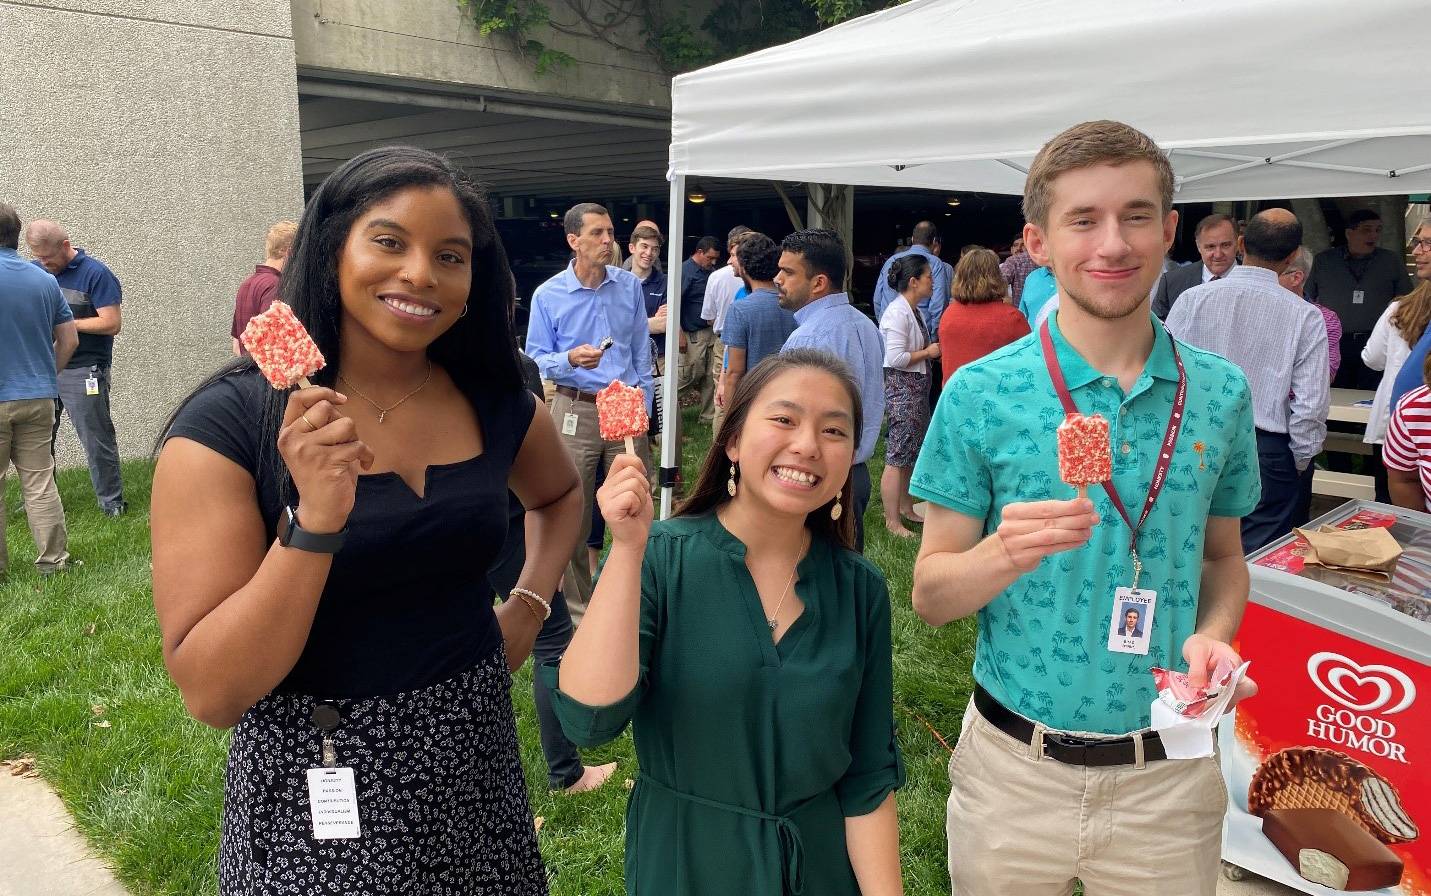 Dewberry’s headquarters in Fairfax, Virginia, hosted an ice cream social for employees to network and beat the heat. 